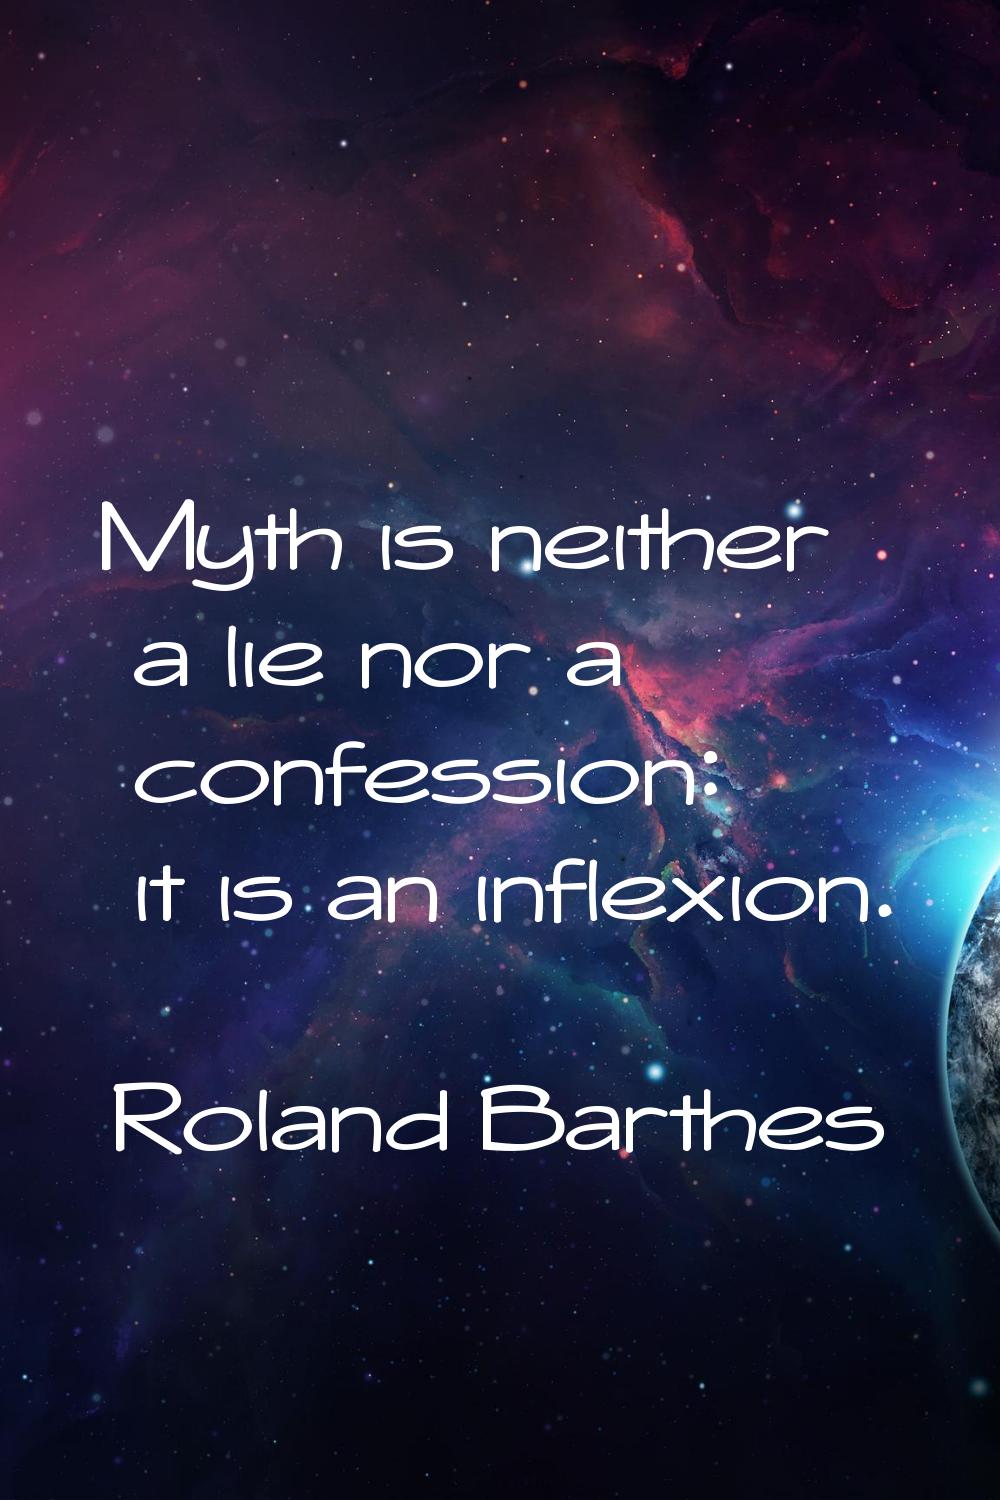 Myth is neither a lie nor a confession: it is an inflexion.